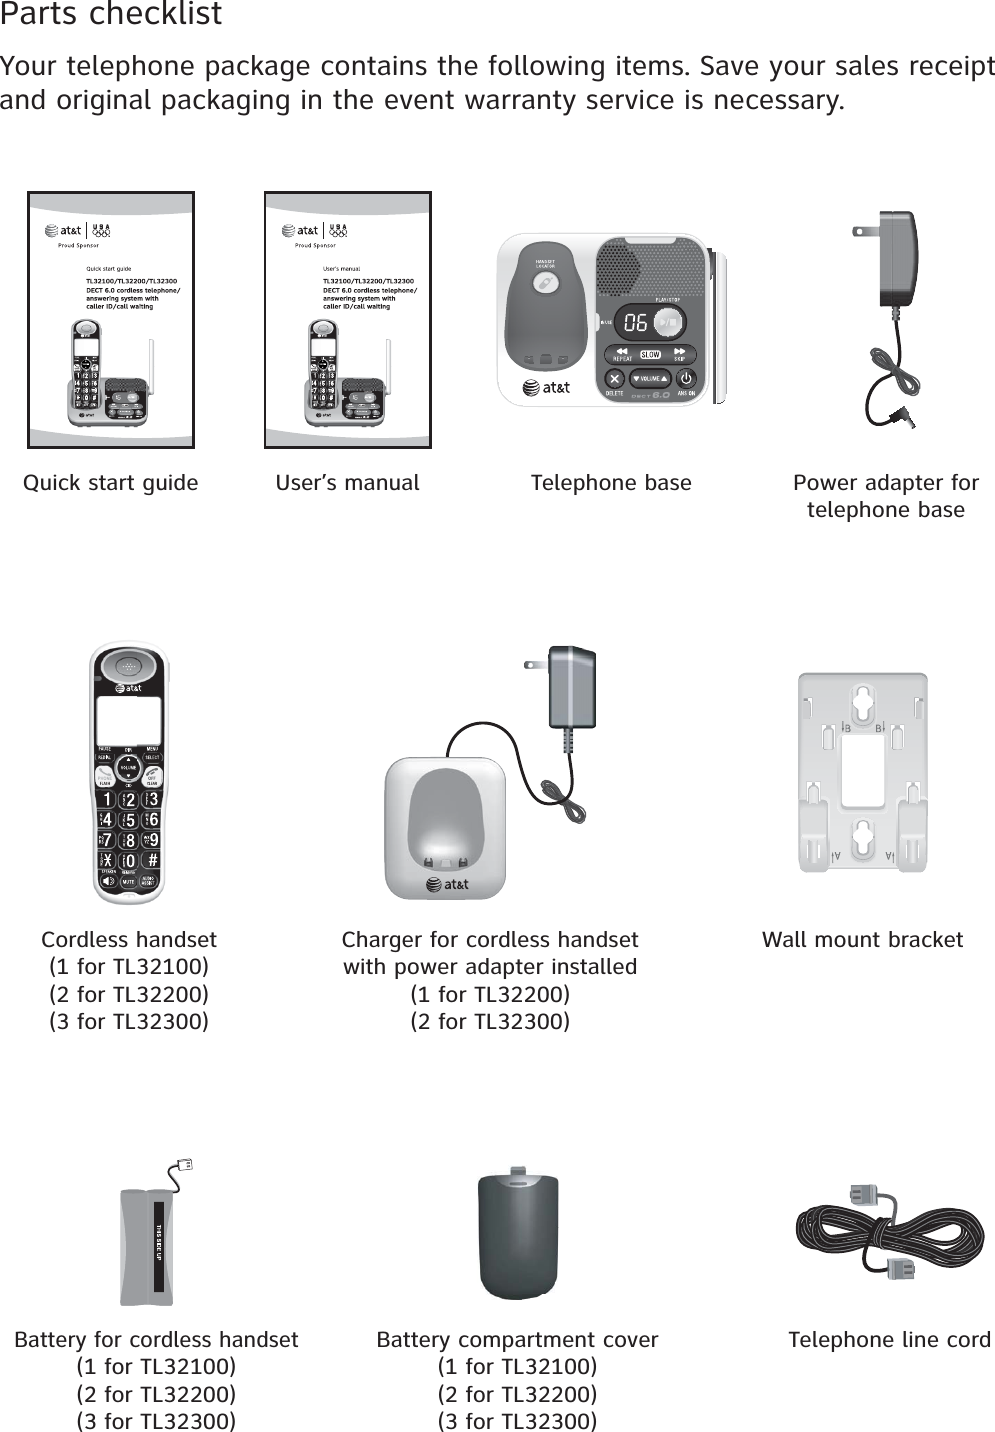 Parts checklistYour telephone package contains the following items. Save your sales receipt and original packaging in the event warranty service is necessary.Power adapter for telephone baseTelephone baseQuick start guide User’s manualWall mount bracketCharger for cordless handset with power adapter installed(1 for TL32200)(2 for TL32300)Cordless handset(1 for TL32100)(2 for TL32200)(3 for TL32300)Telephone line cordBattery for cordless handset(1 for TL32100)(2 for TL32200)(3 for TL32300)Battery compartment cover(1 for TL32100)(2 for TL32200)(3 for TL32300)